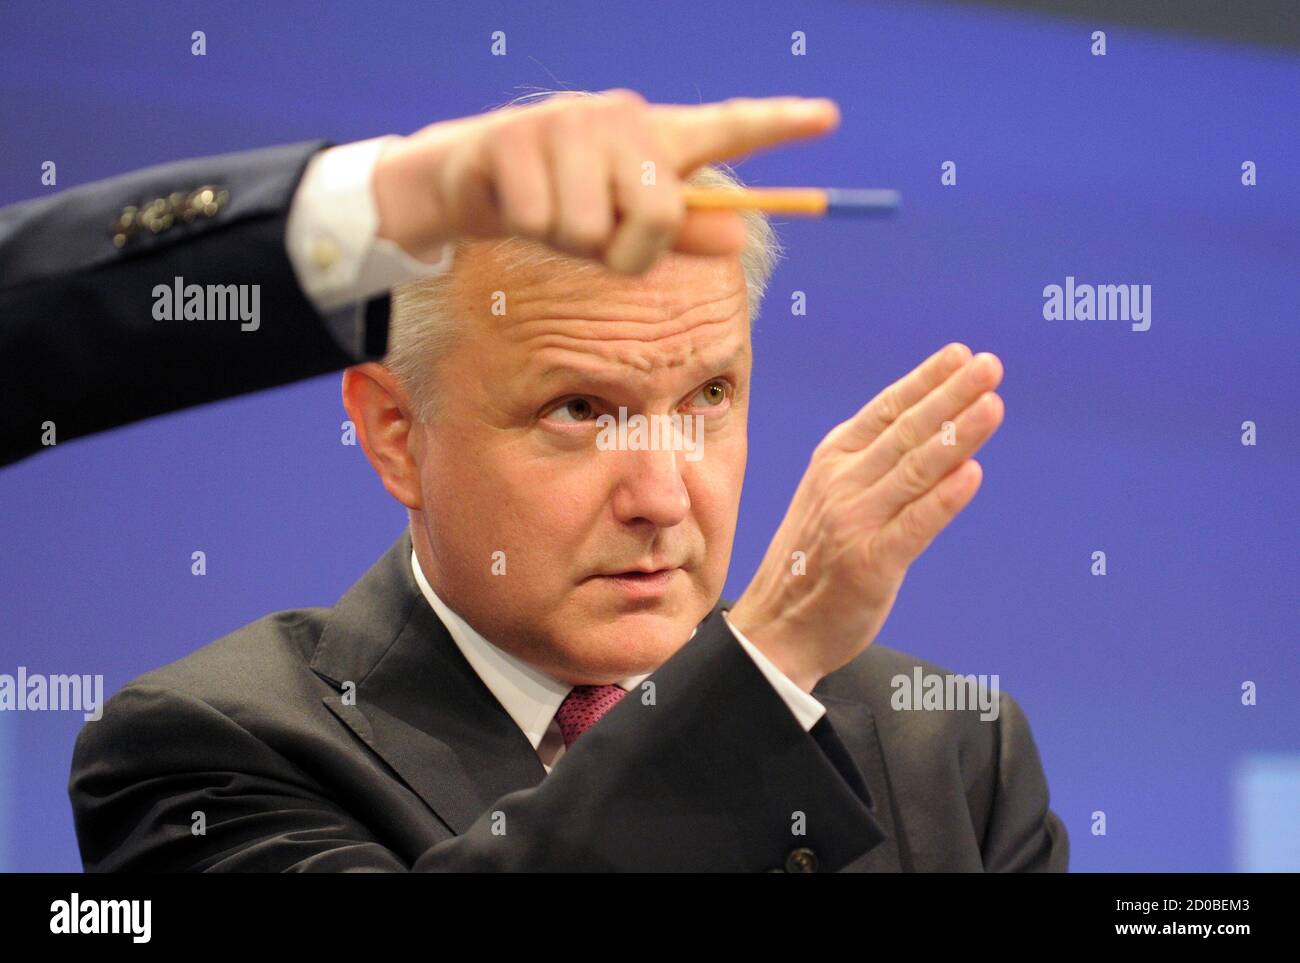 European Economic and Monetary Affairs Commissioner Olli Rehn attends a news conference about the convergence report for Latvia at the European Commision in Brussels June 5, 2013.   REUTERS/Laurent Dubrule    (BELGIUM - Tags: POLITICS BUSINESS) Stock Photo